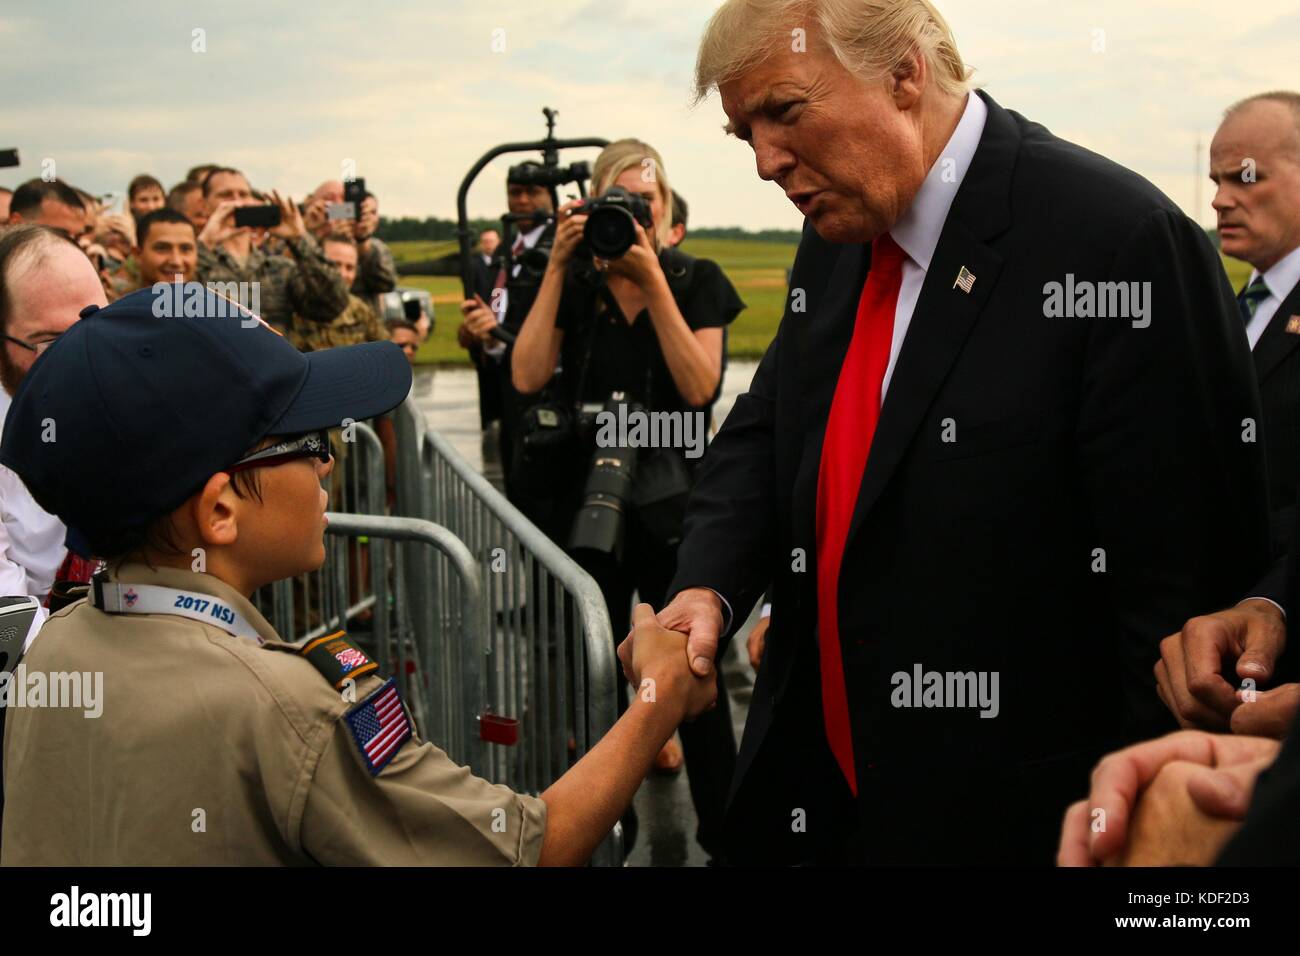 U.S. President Donald Trumps shakes hands with a boy scout as he arrives at the Raleigh County Memorial Airport for the Boy Scouts of America National Jamboree July 24, 2017 near Beckley, West Virginia.   (photo by Dustin D. Biven  via Planetpix) Stock Photo